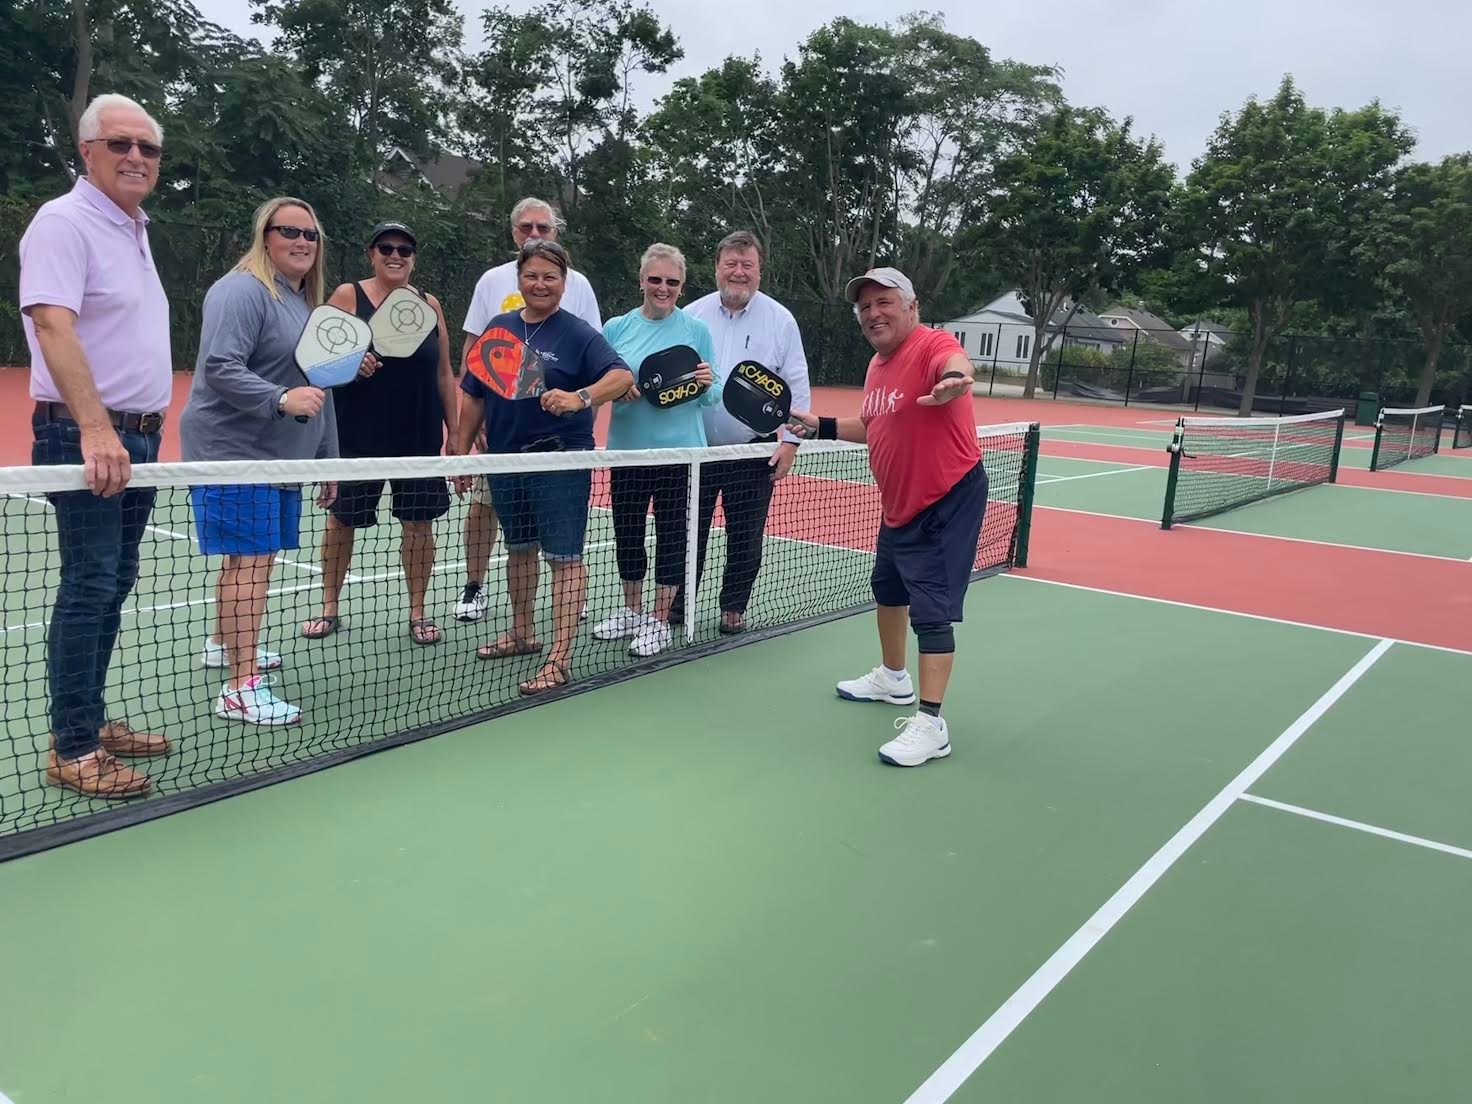 The newly redone courts today. Pictured is trustee Joseph Keyes, BID executive director Dennis Smith and Parks and Rec director Maria Giustizia with the pickleball players.